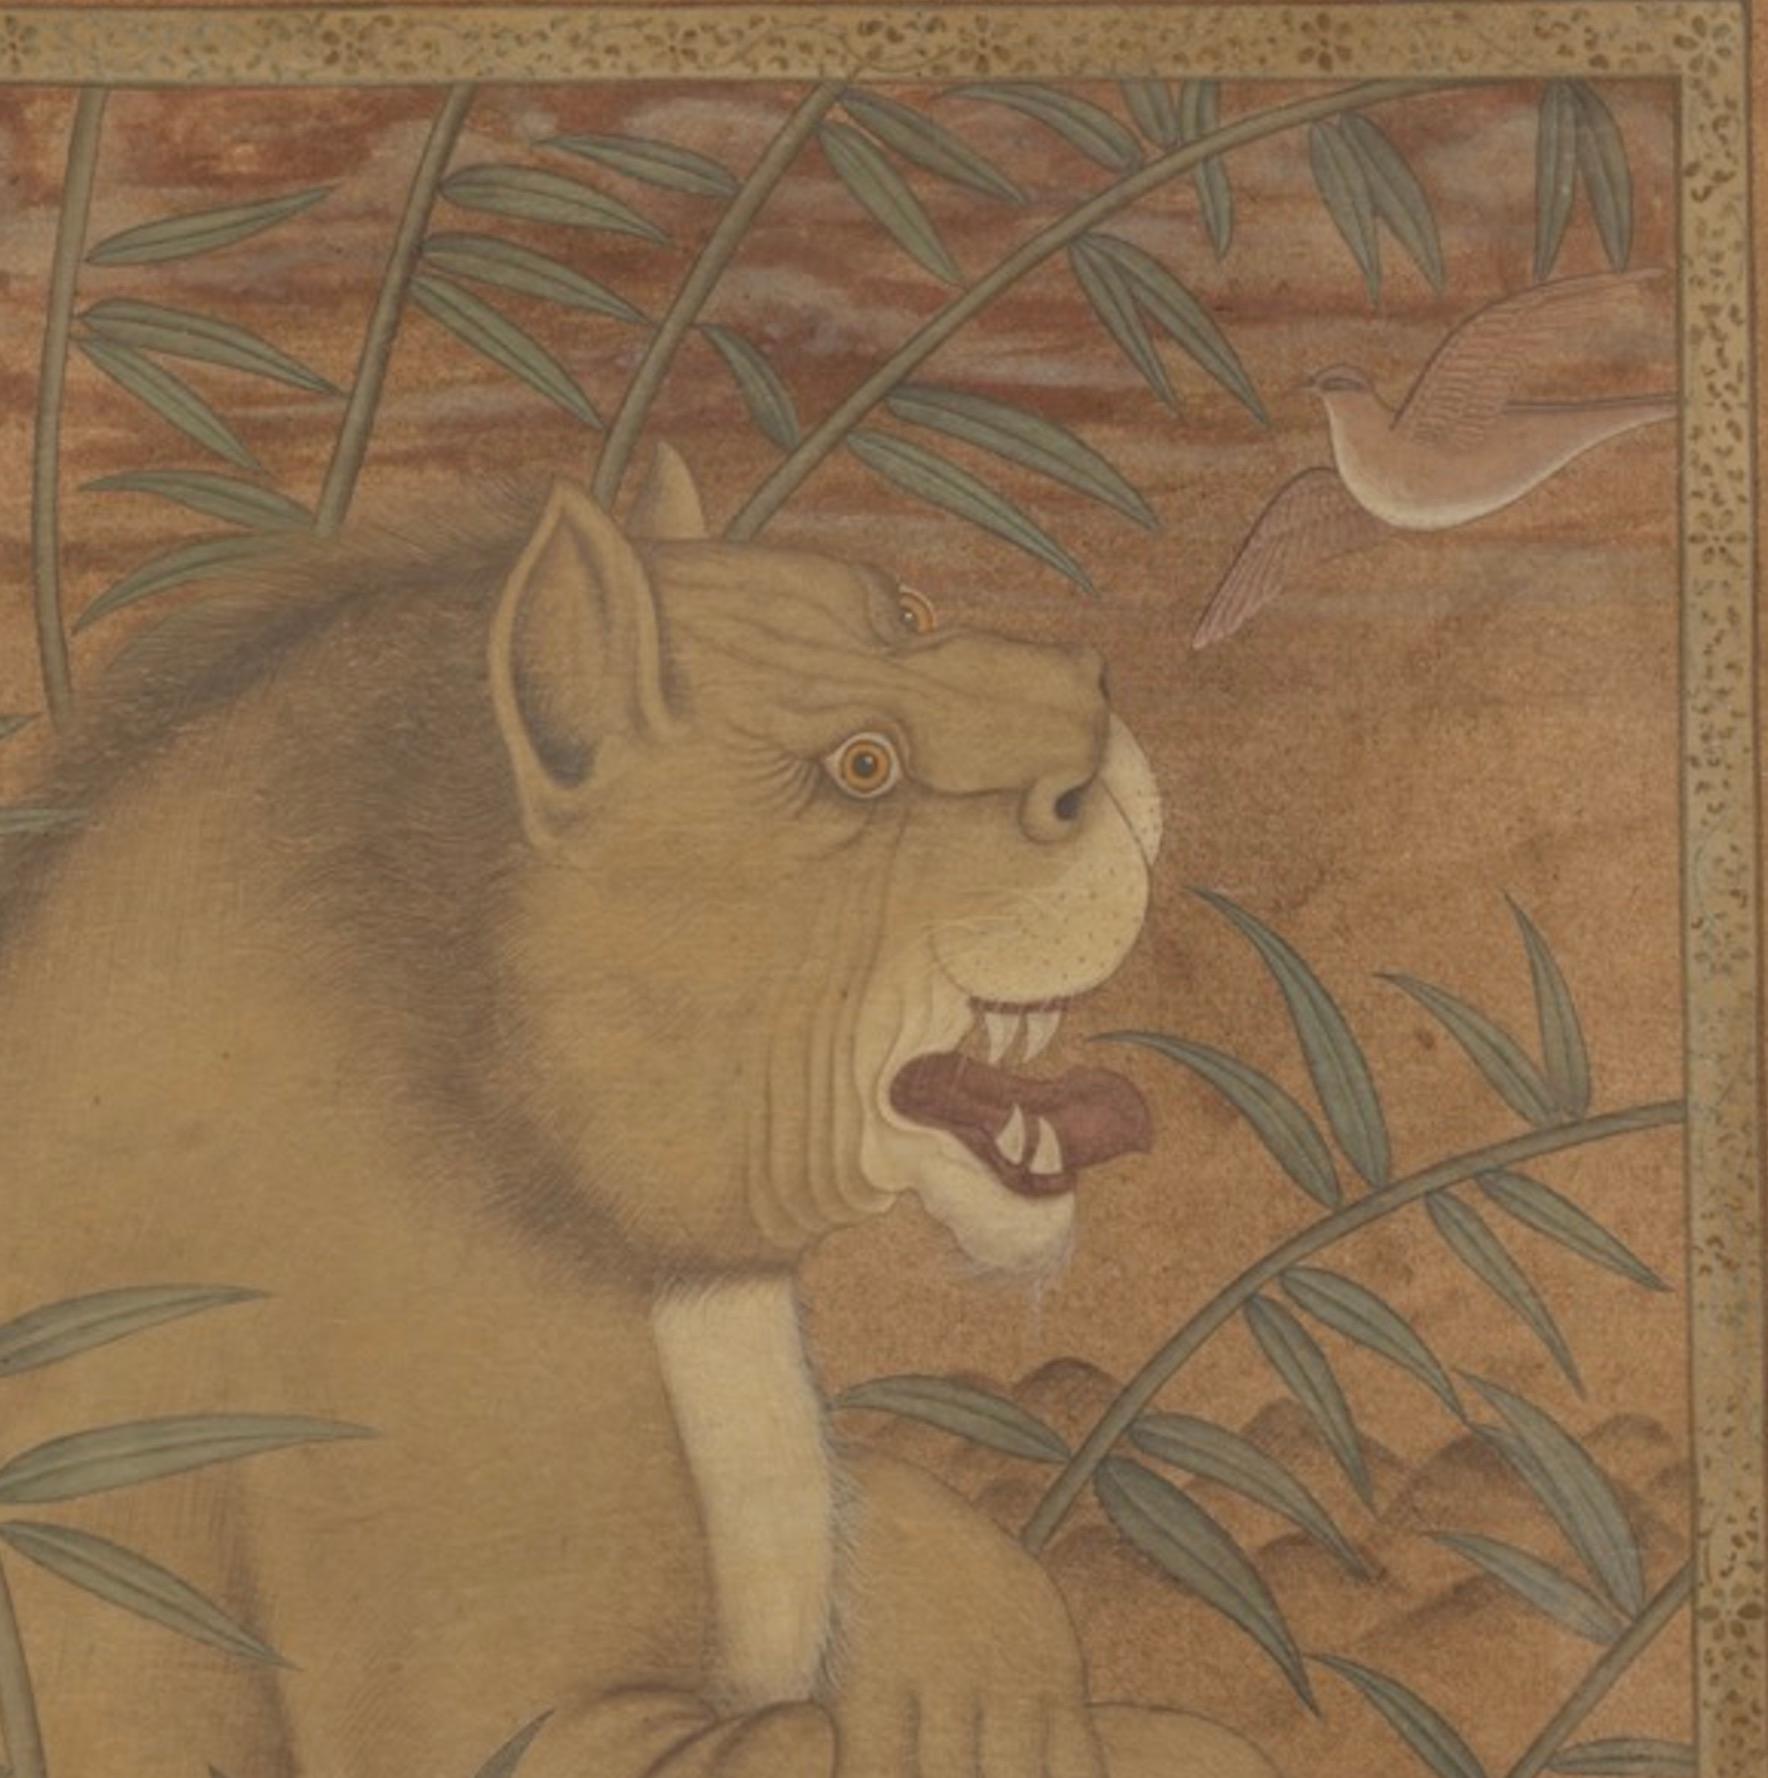 A Mughal painting of a ‘Lion at rest’
North India, early 19th century
?
Watercolour on paper, H. 46.5 x W. 68 cm

?The present painting is a large copy after the famous miniature painting (20.3 x 15.2 cm) in the collection of the Metropolitan